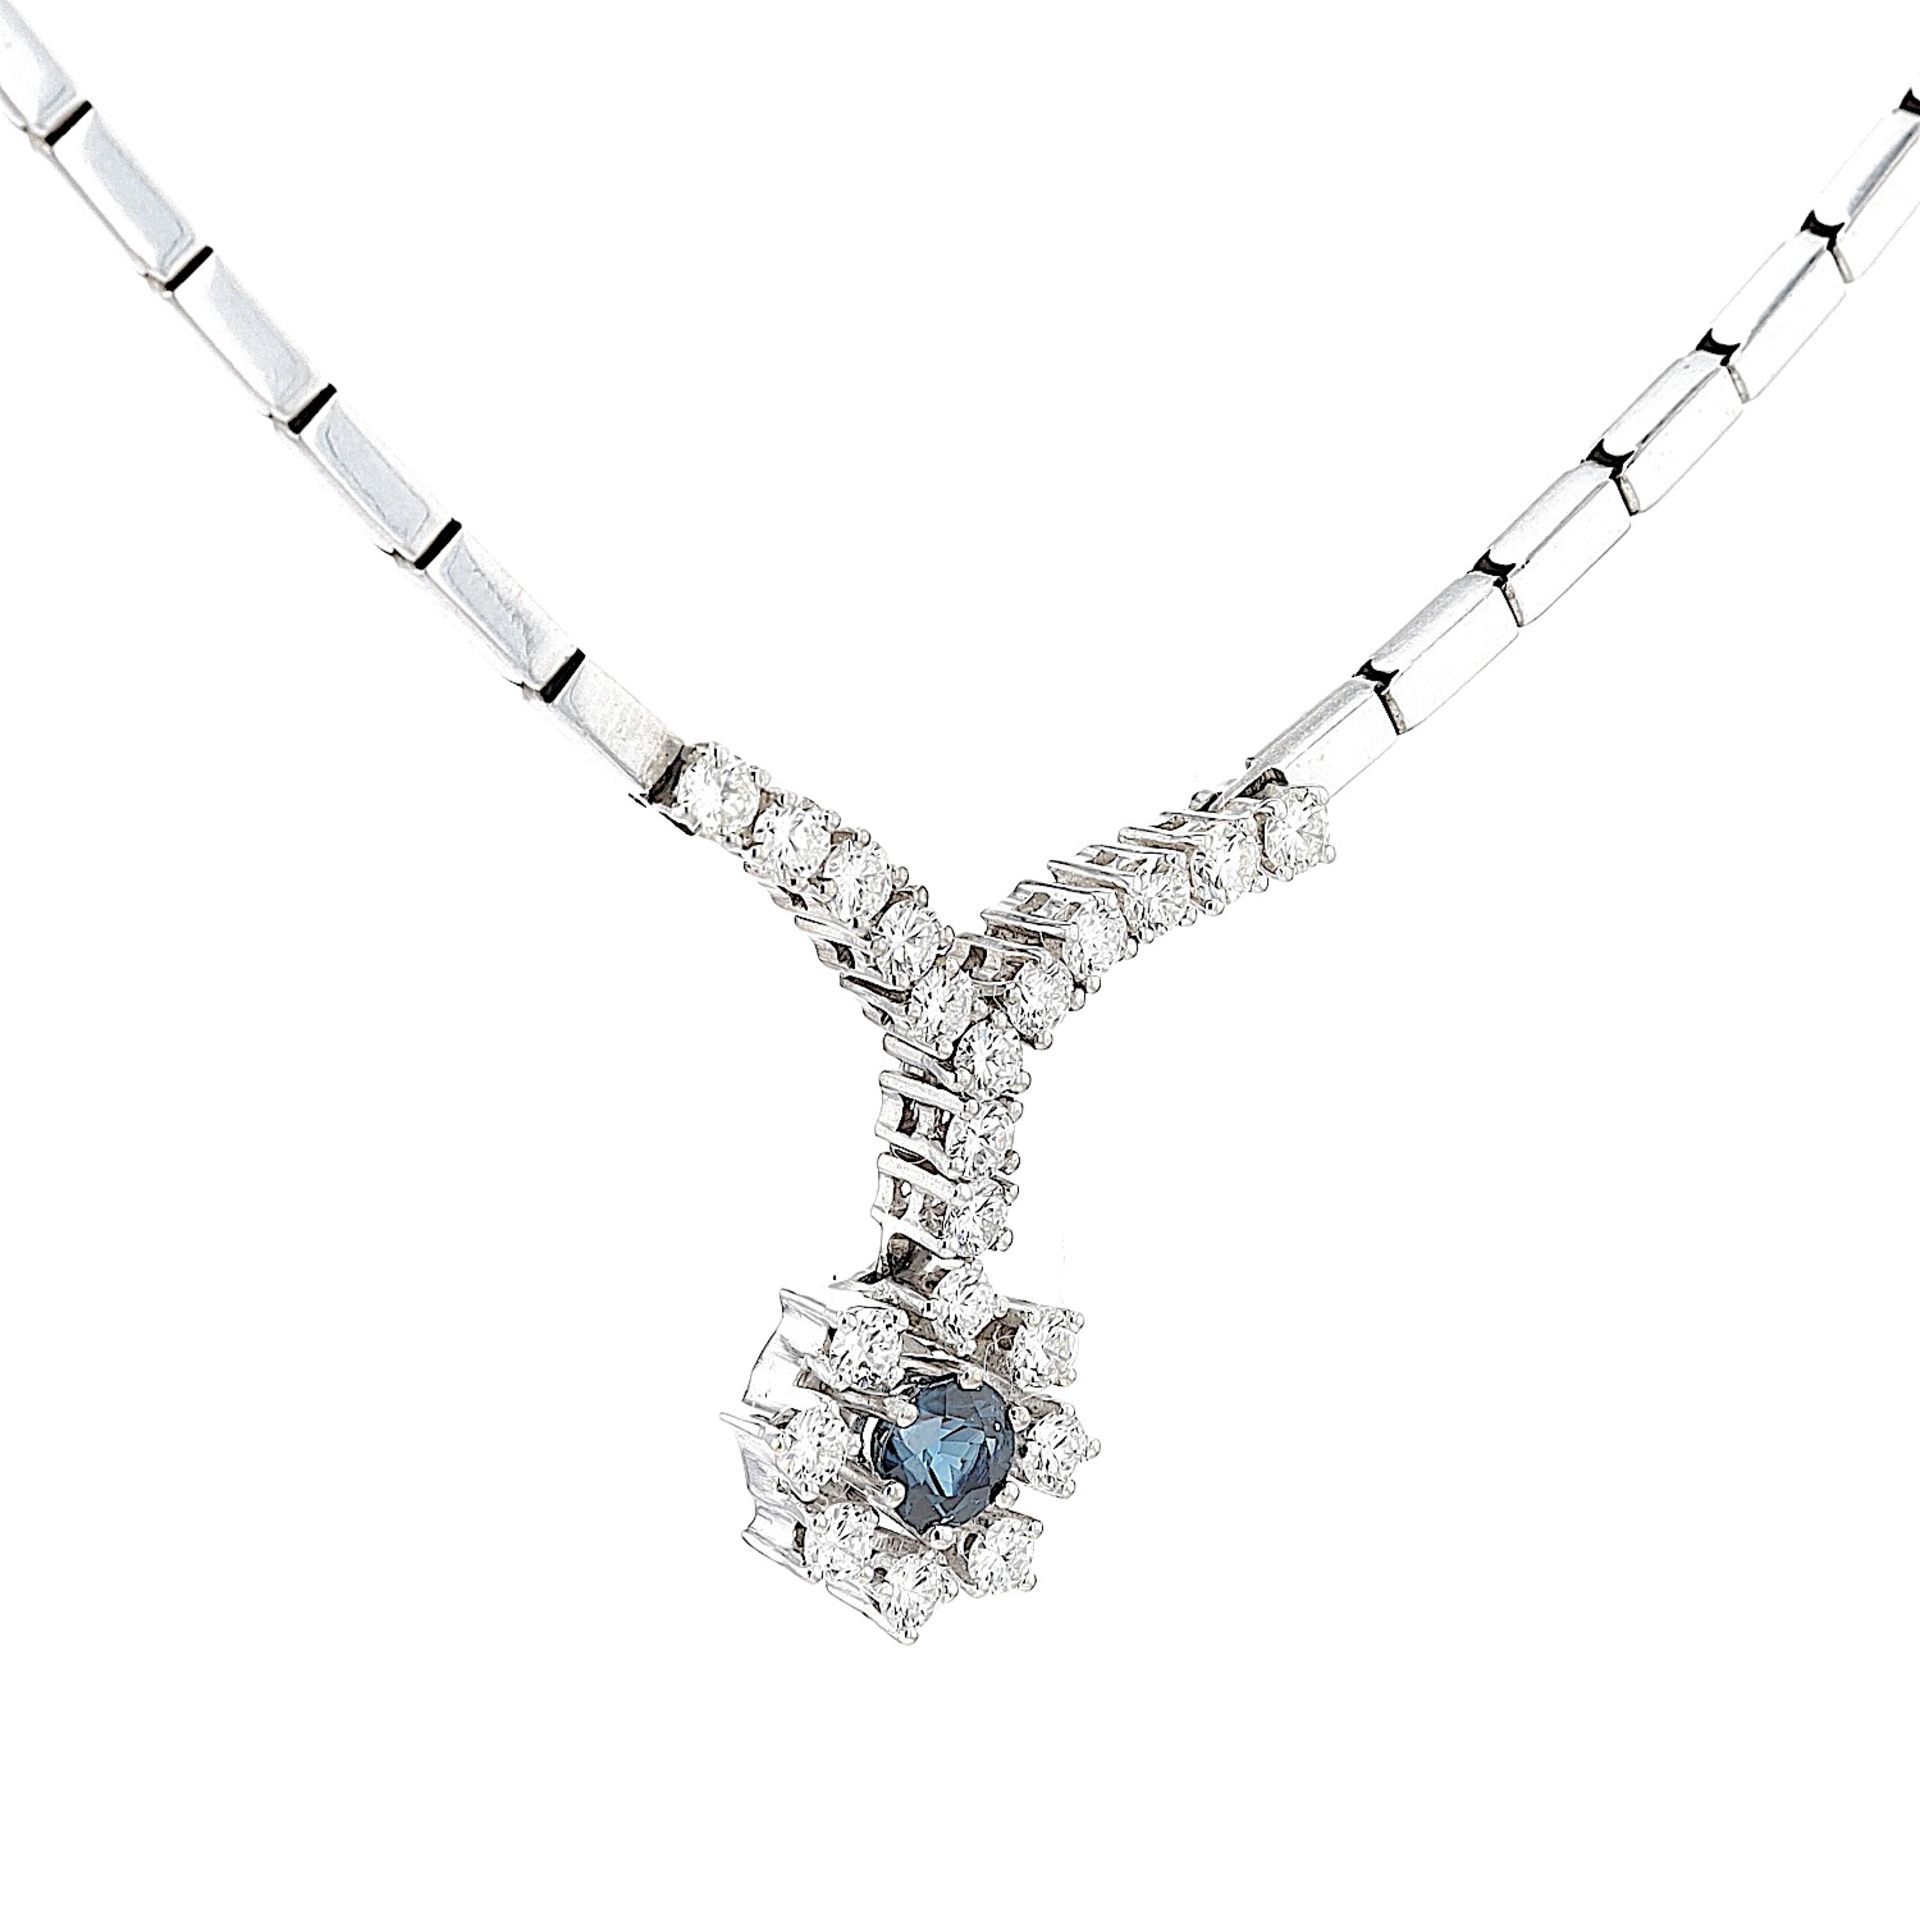 Necklace with brilliants and a sapphire - Image 3 of 6